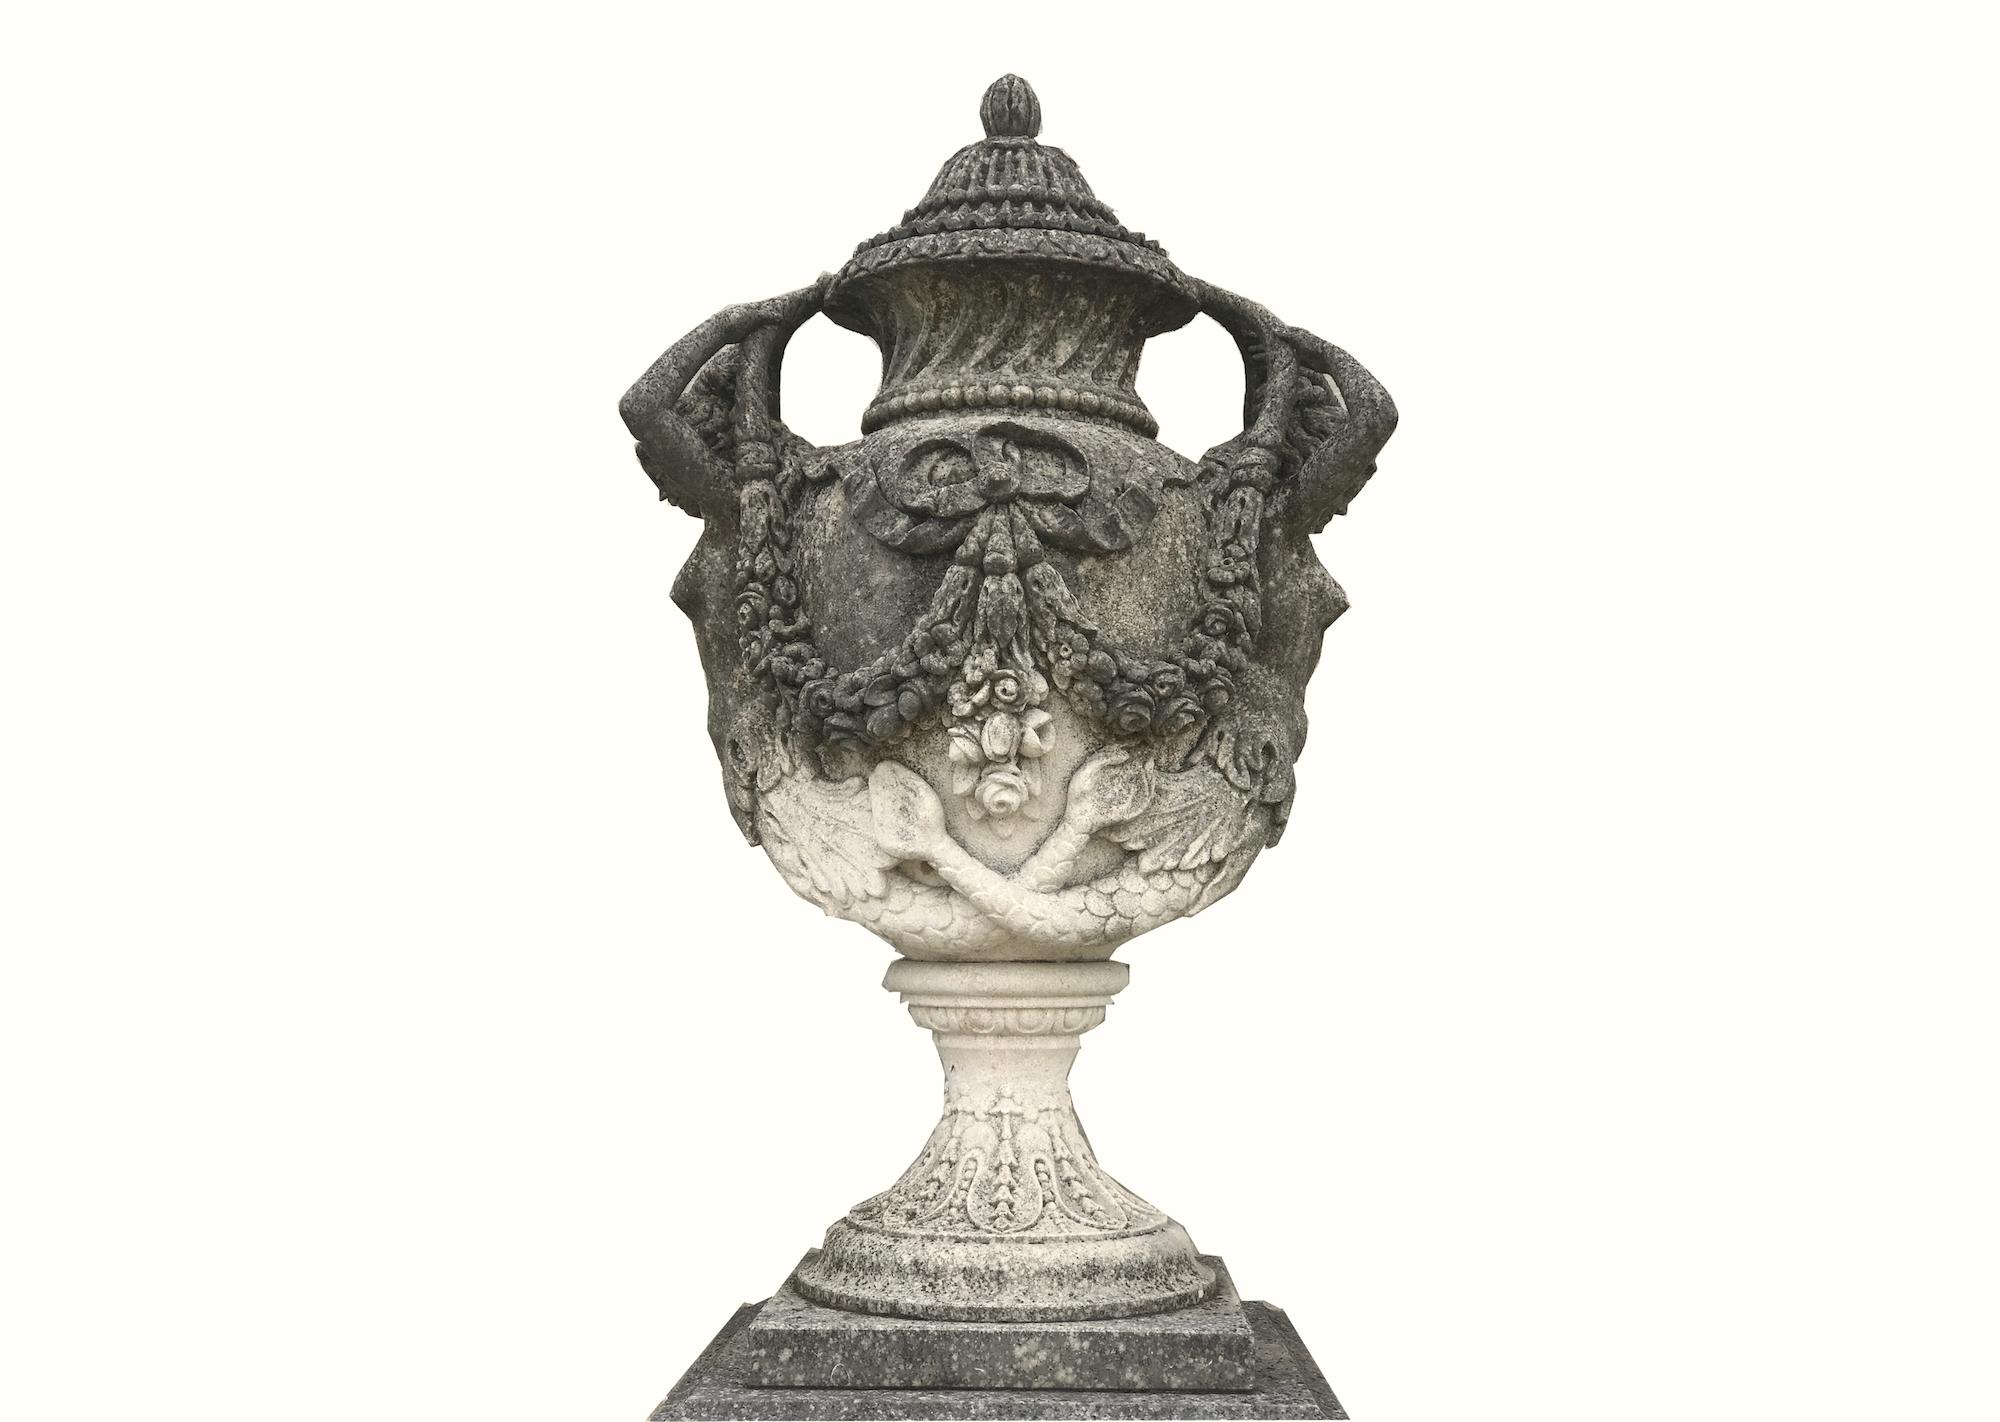 Impressive pair of hand carved vases in the neoclassical style, the cover with fruit finial, above an ovoid body adorned with Nereid handles and festoons, raised on circular foot and square base, on square paneled pedestal.
Executed in a highest